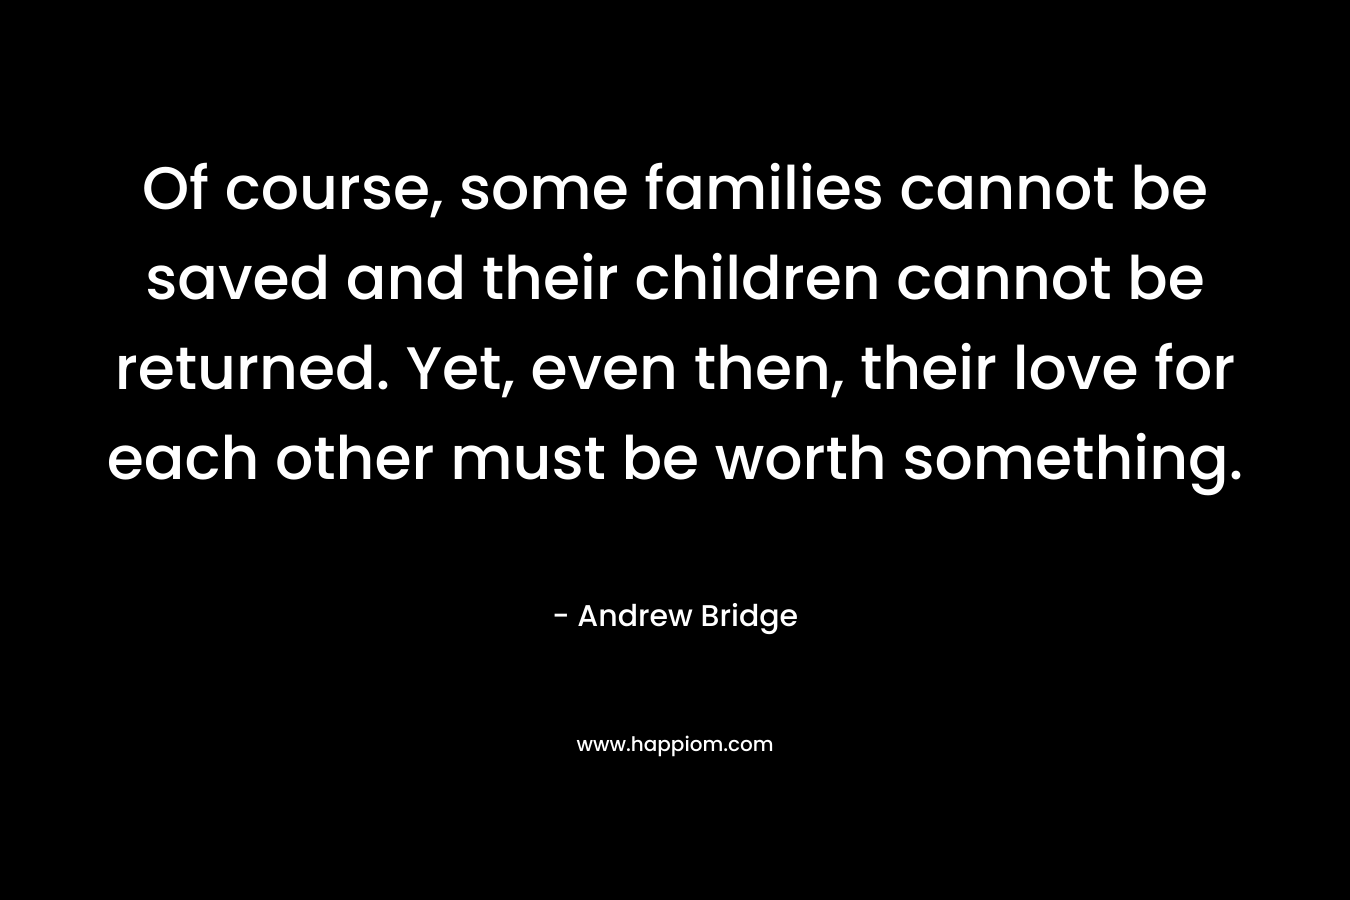 Of course, some families cannot be saved and their children cannot be returned. Yet, even then, their love for each other must be worth something. – Andrew Bridge